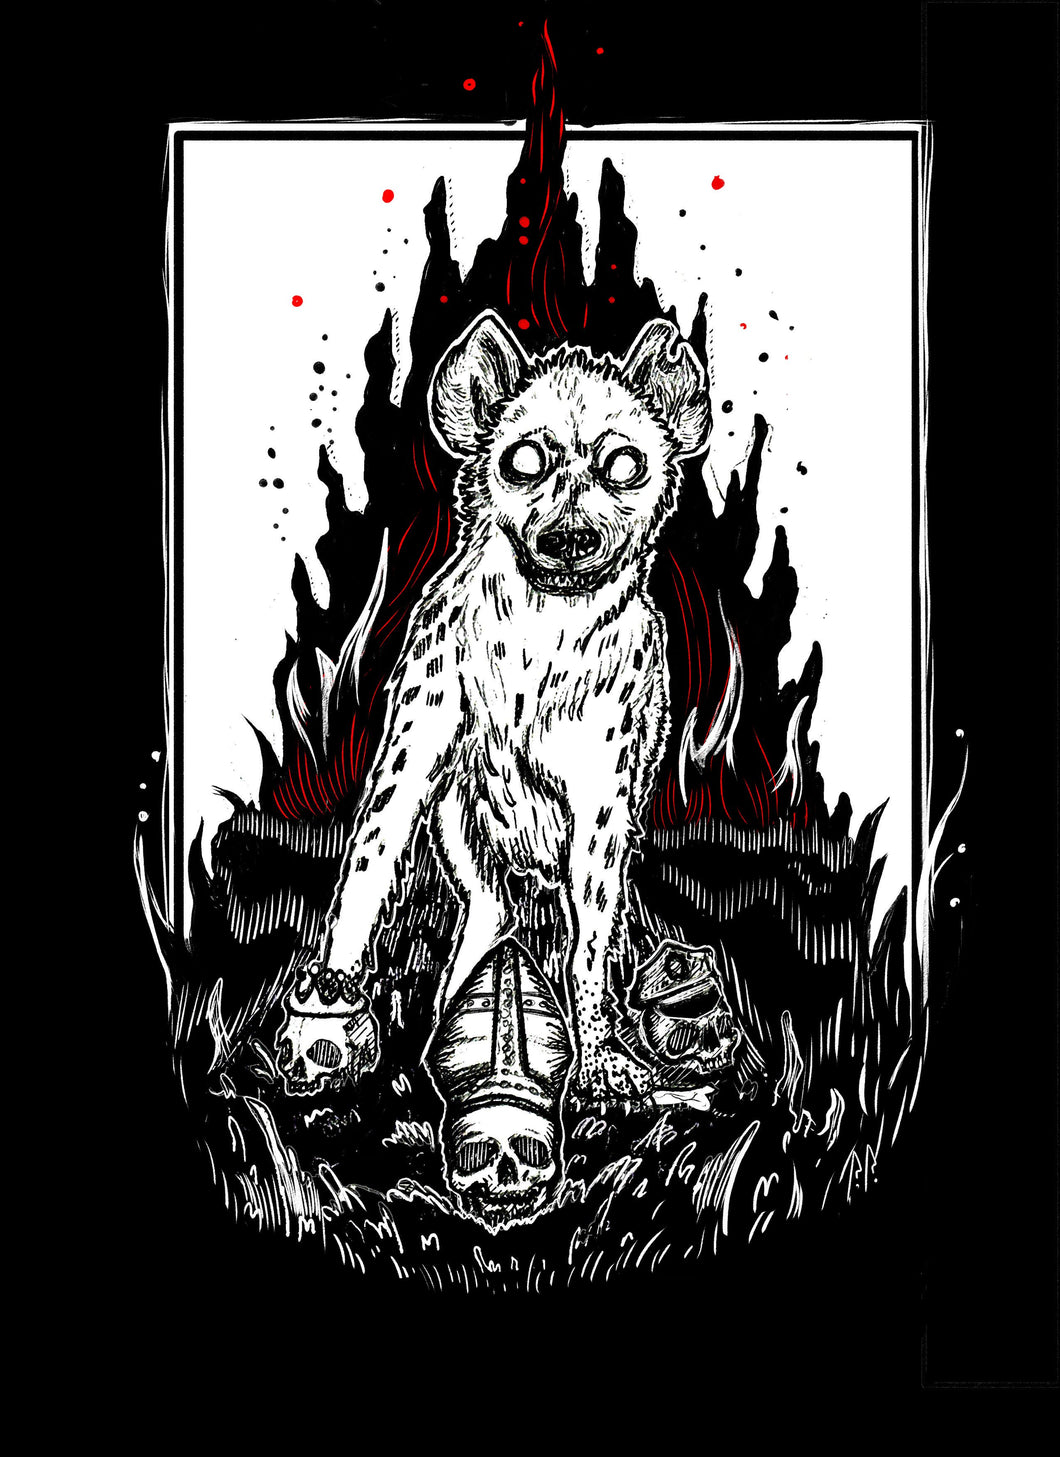 Hyena patch - Pope, King and Cop skulls with flames - White and red ink - Screen printing on black fabric